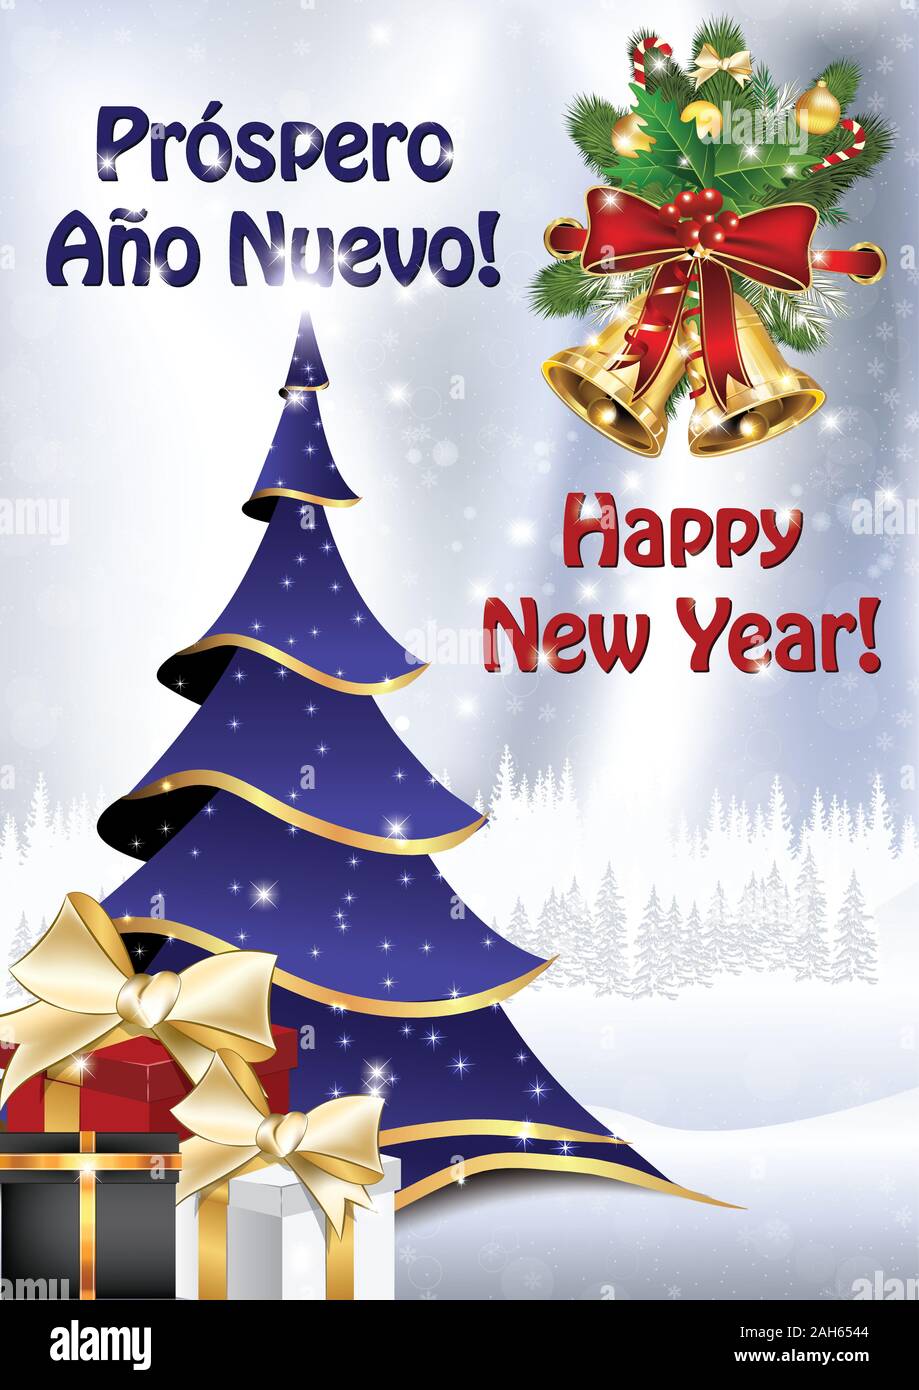 Classic greeting card for the New Year celebration, with text in Spanish and English. Stock Photo